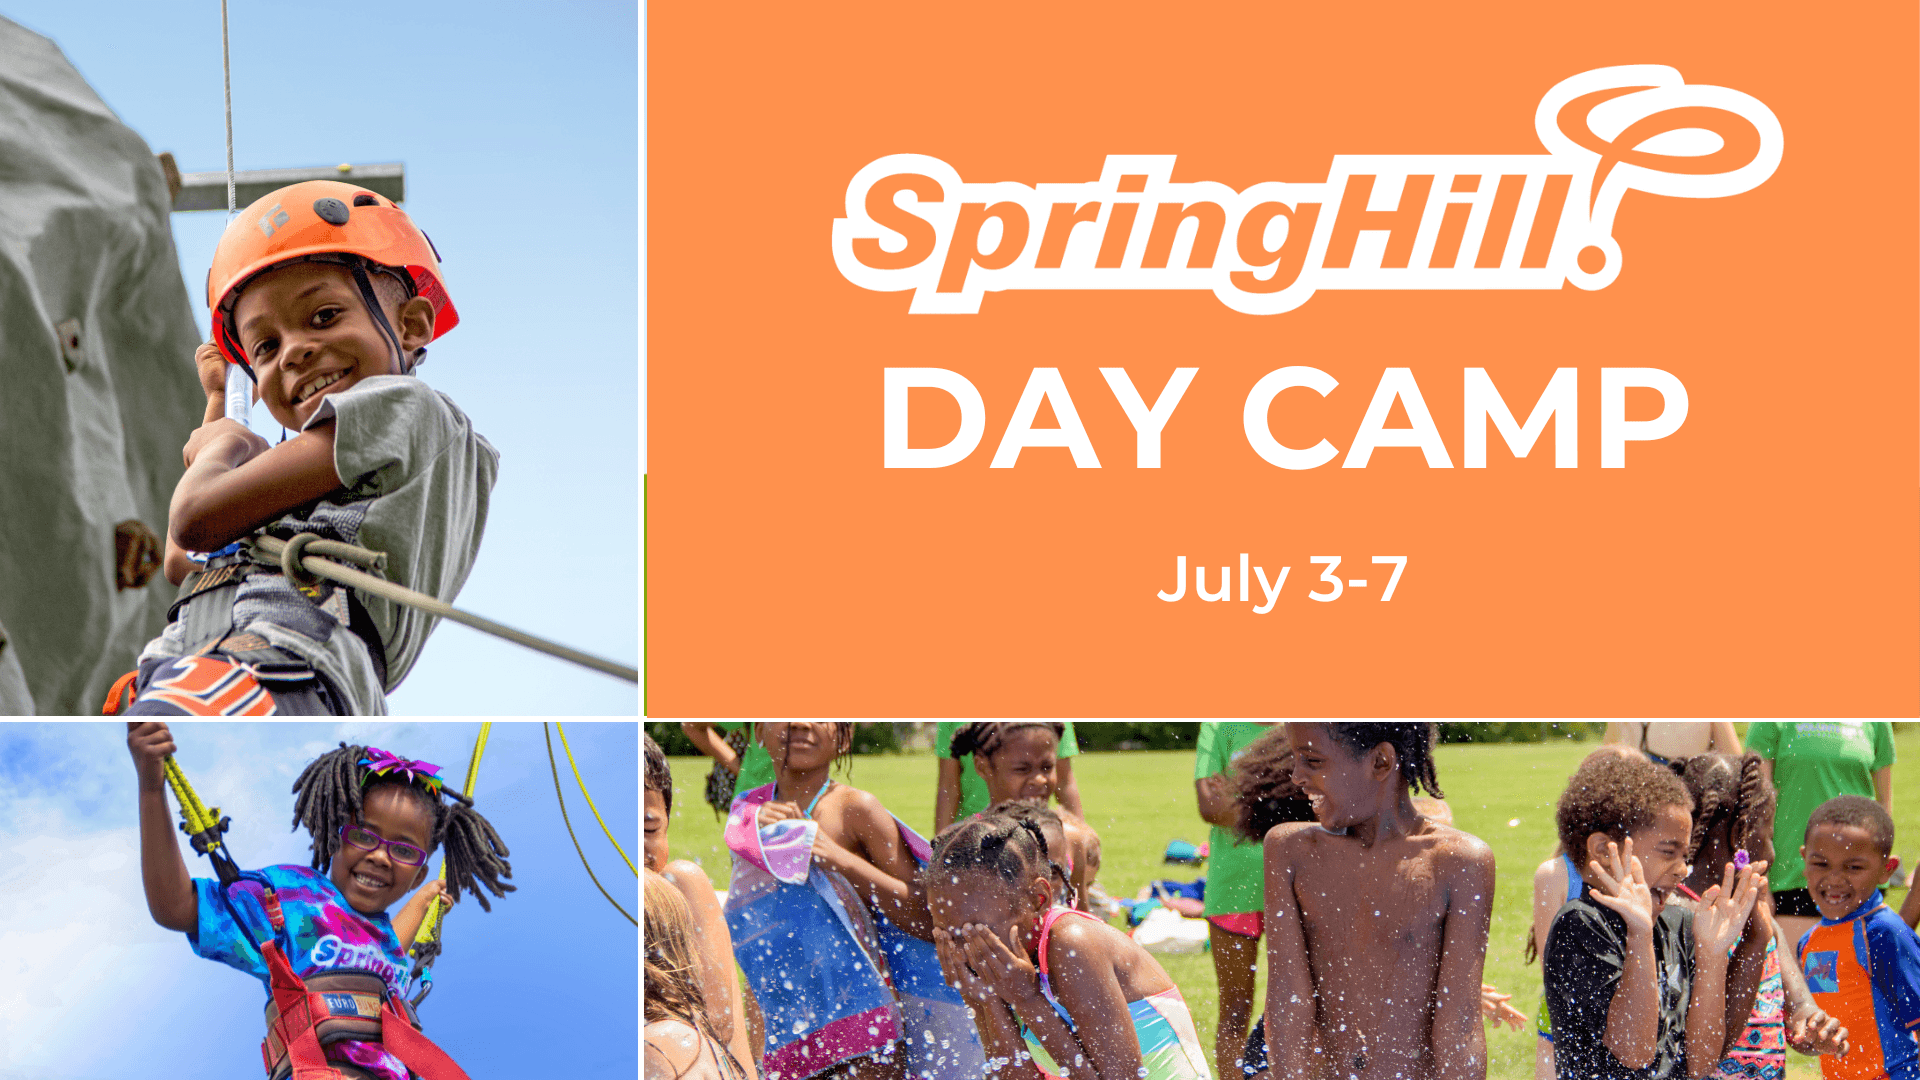 SpringHill Day Camp